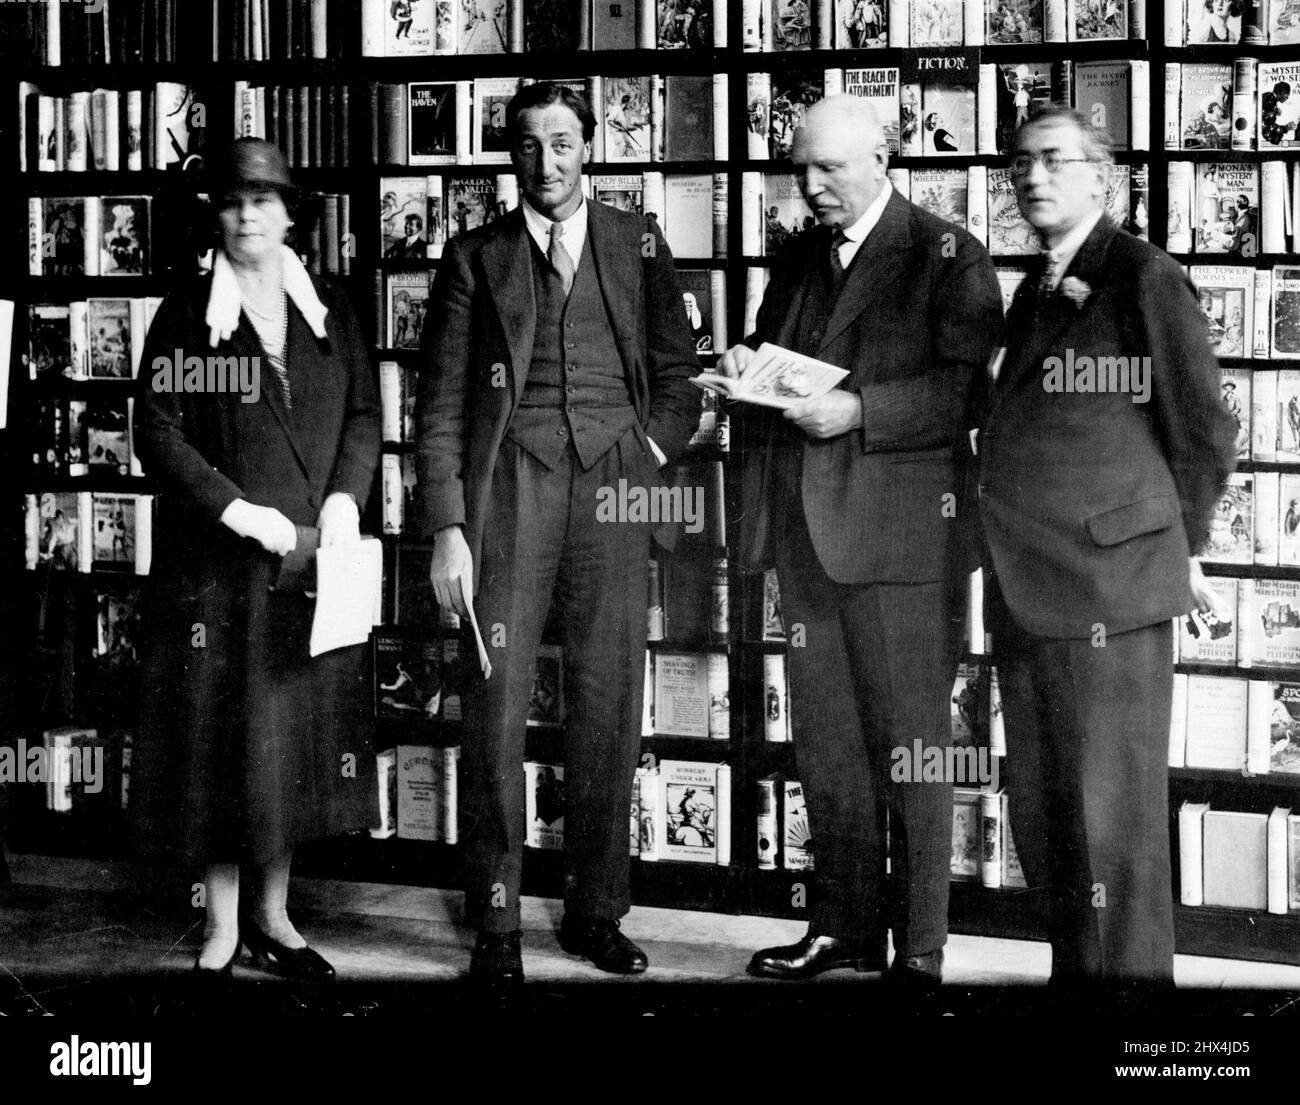 Exhibition of Australian Literature. Mr. A.P. Herbert, the Well-Known Novelist opened an Exhibition of works by Australian authors at Australia House, London to-day, (September 29). Our picture shows left to right Lady Hyrie, Mr. A.P. Herbert, Sir Granville de Laune Ryrie, and Mr. J.C. Squire. November 12, 1931. Stock Photo